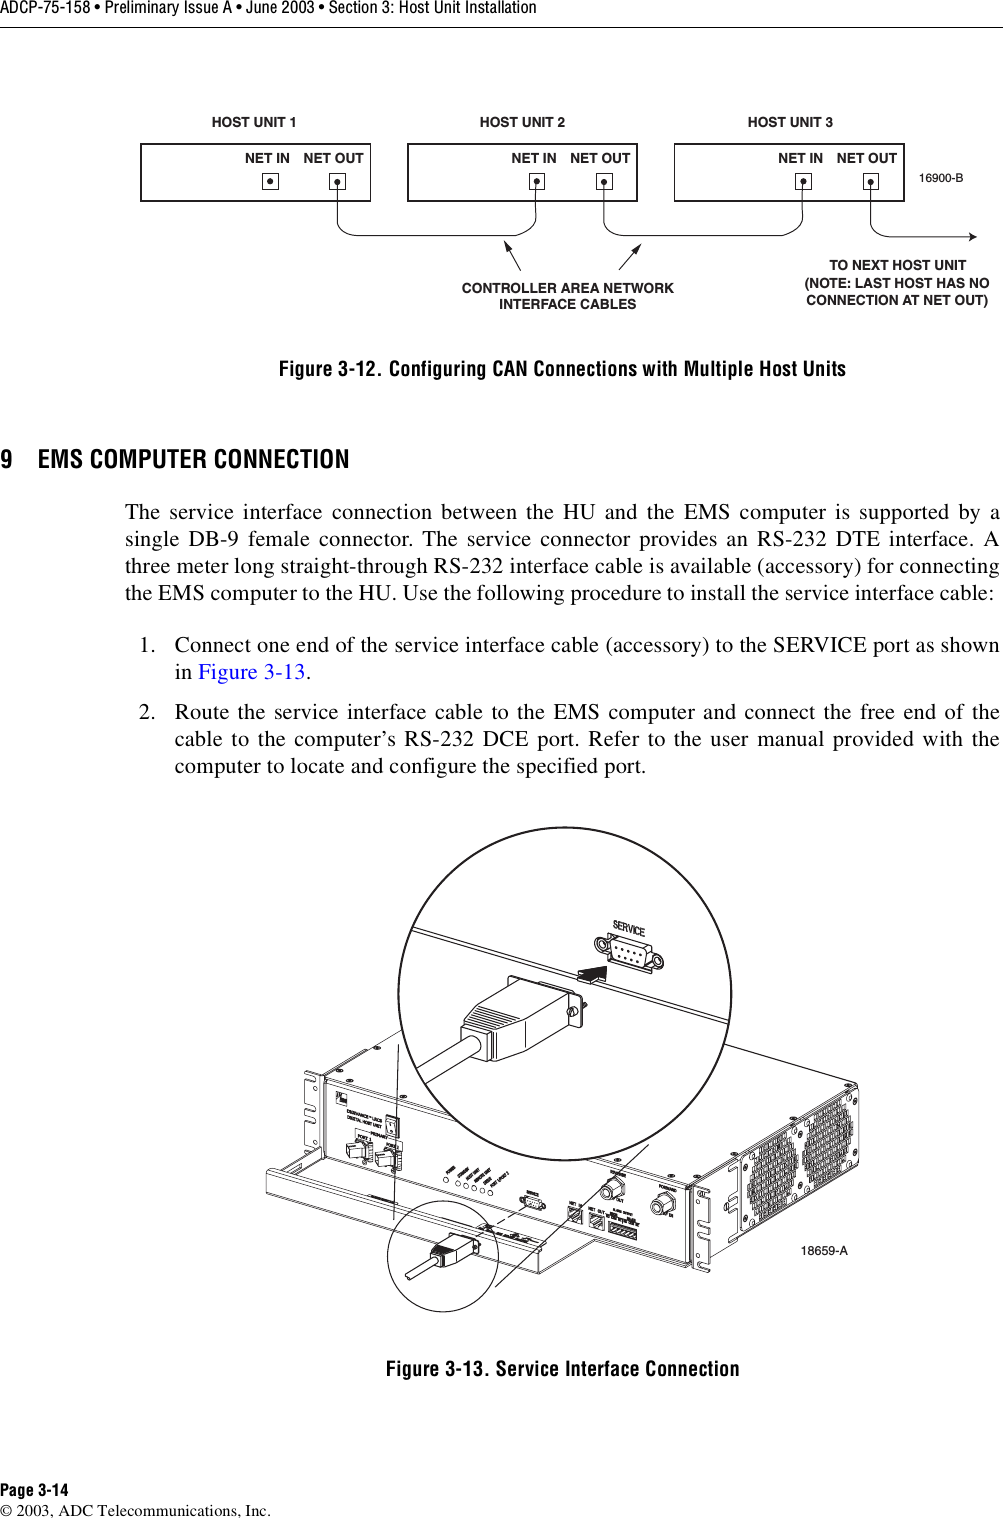 ADCP-75-158 • Preliminary Issue A • June 2003 • Section 3: Host Unit InstallationPage 3-14© 2003, ADC Telecommunications, Inc.Figure 3-12. Configuring CAN Connections with Multiple Host Units9 EMS COMPUTER CONNECTIONThe service interface connection between the HU and the EMS computer is supported by asingle DB-9 female connector. The service connector provides an RS-232 DTE interface. Athree meter long straight-through RS-232 interface cable is available (accessory) for connectingthe EMS computer to the HU. Use the following procedure to install the service interface cable: 1. Connect one end of the service interface cable (accessory) to the SERVICE port as shownin Figure 3-13. 2. Route the service interface cable to the EMS computer and connect the free end of thecable to the computer’s RS-232 DCE port. Refer to the user manual provided with thecomputer to locate and configure the specified port. Figure 3-13. Service Interface ConnectionHOST UNIT 1 HOST UNIT 2 HOST UNIT 3NET IN NET OUT NET IN NET OUT NET IN NET OUT16900-BCONTROLLER AREA NETWORKINTERFACE CABLESTO NEXT HOST UNIT(NOTE: LAST HOST HAS NOCONNECTION AT NET OUT)18659-A